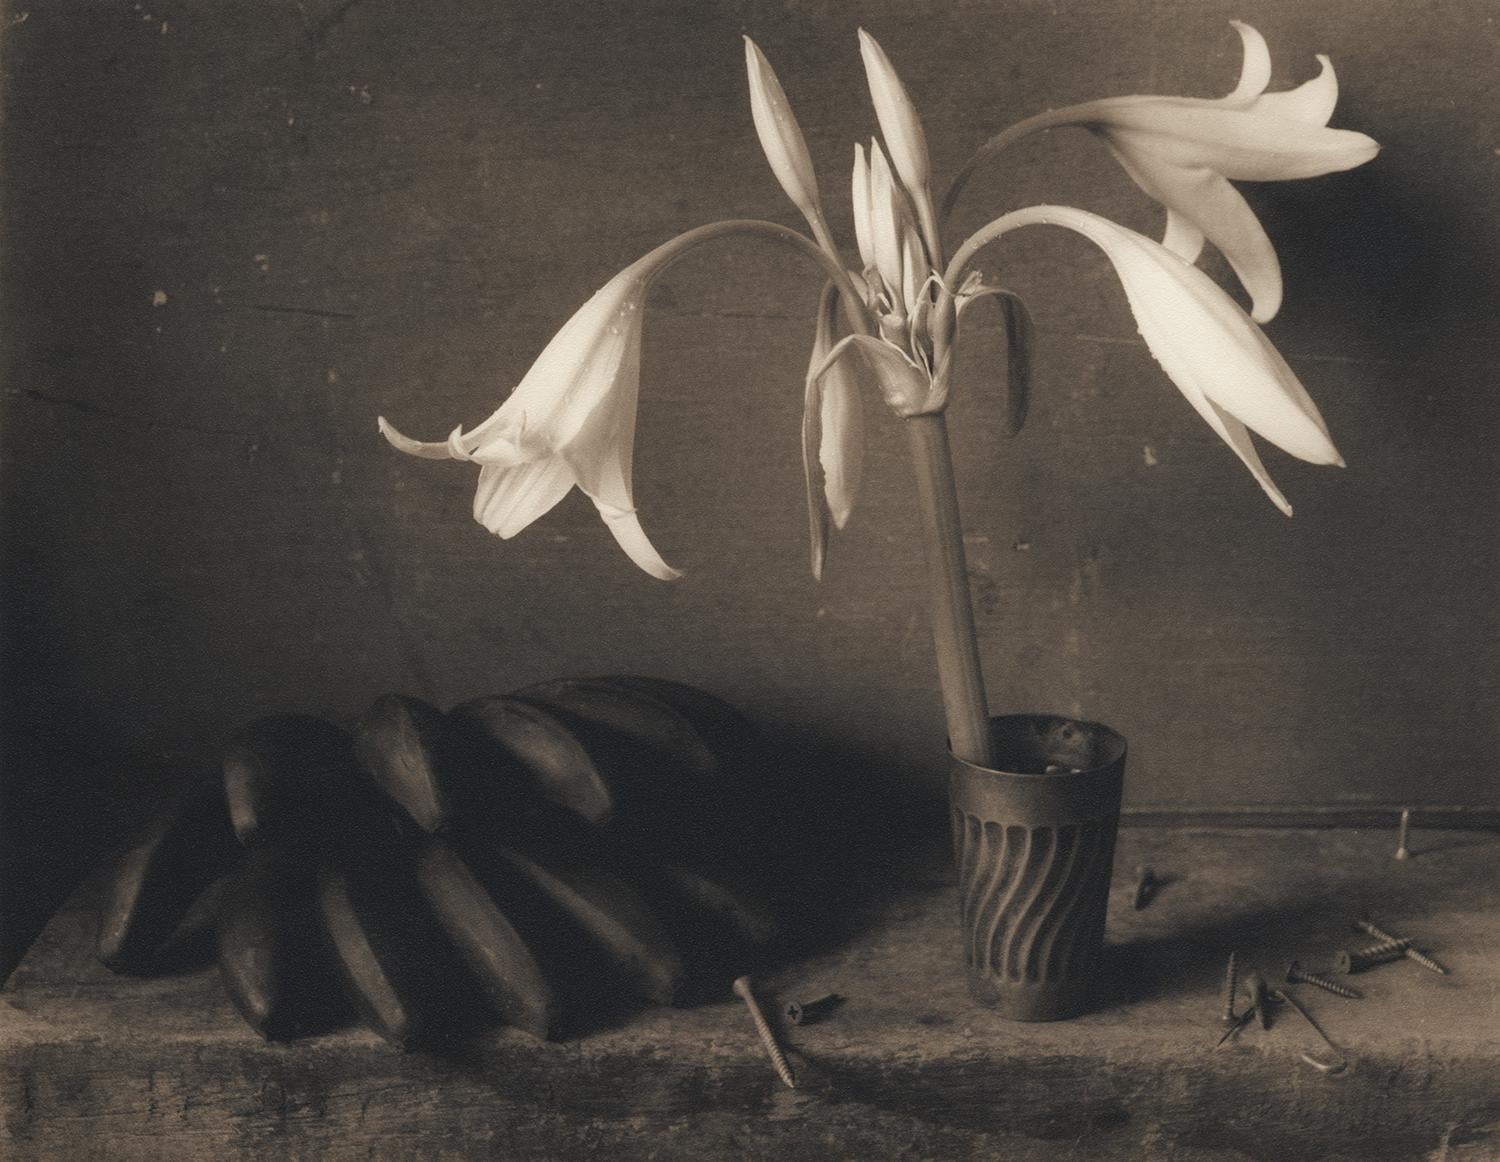 Lilies & Plantains: Sepia Toned Still Life Photograph of Flowers and Fruit